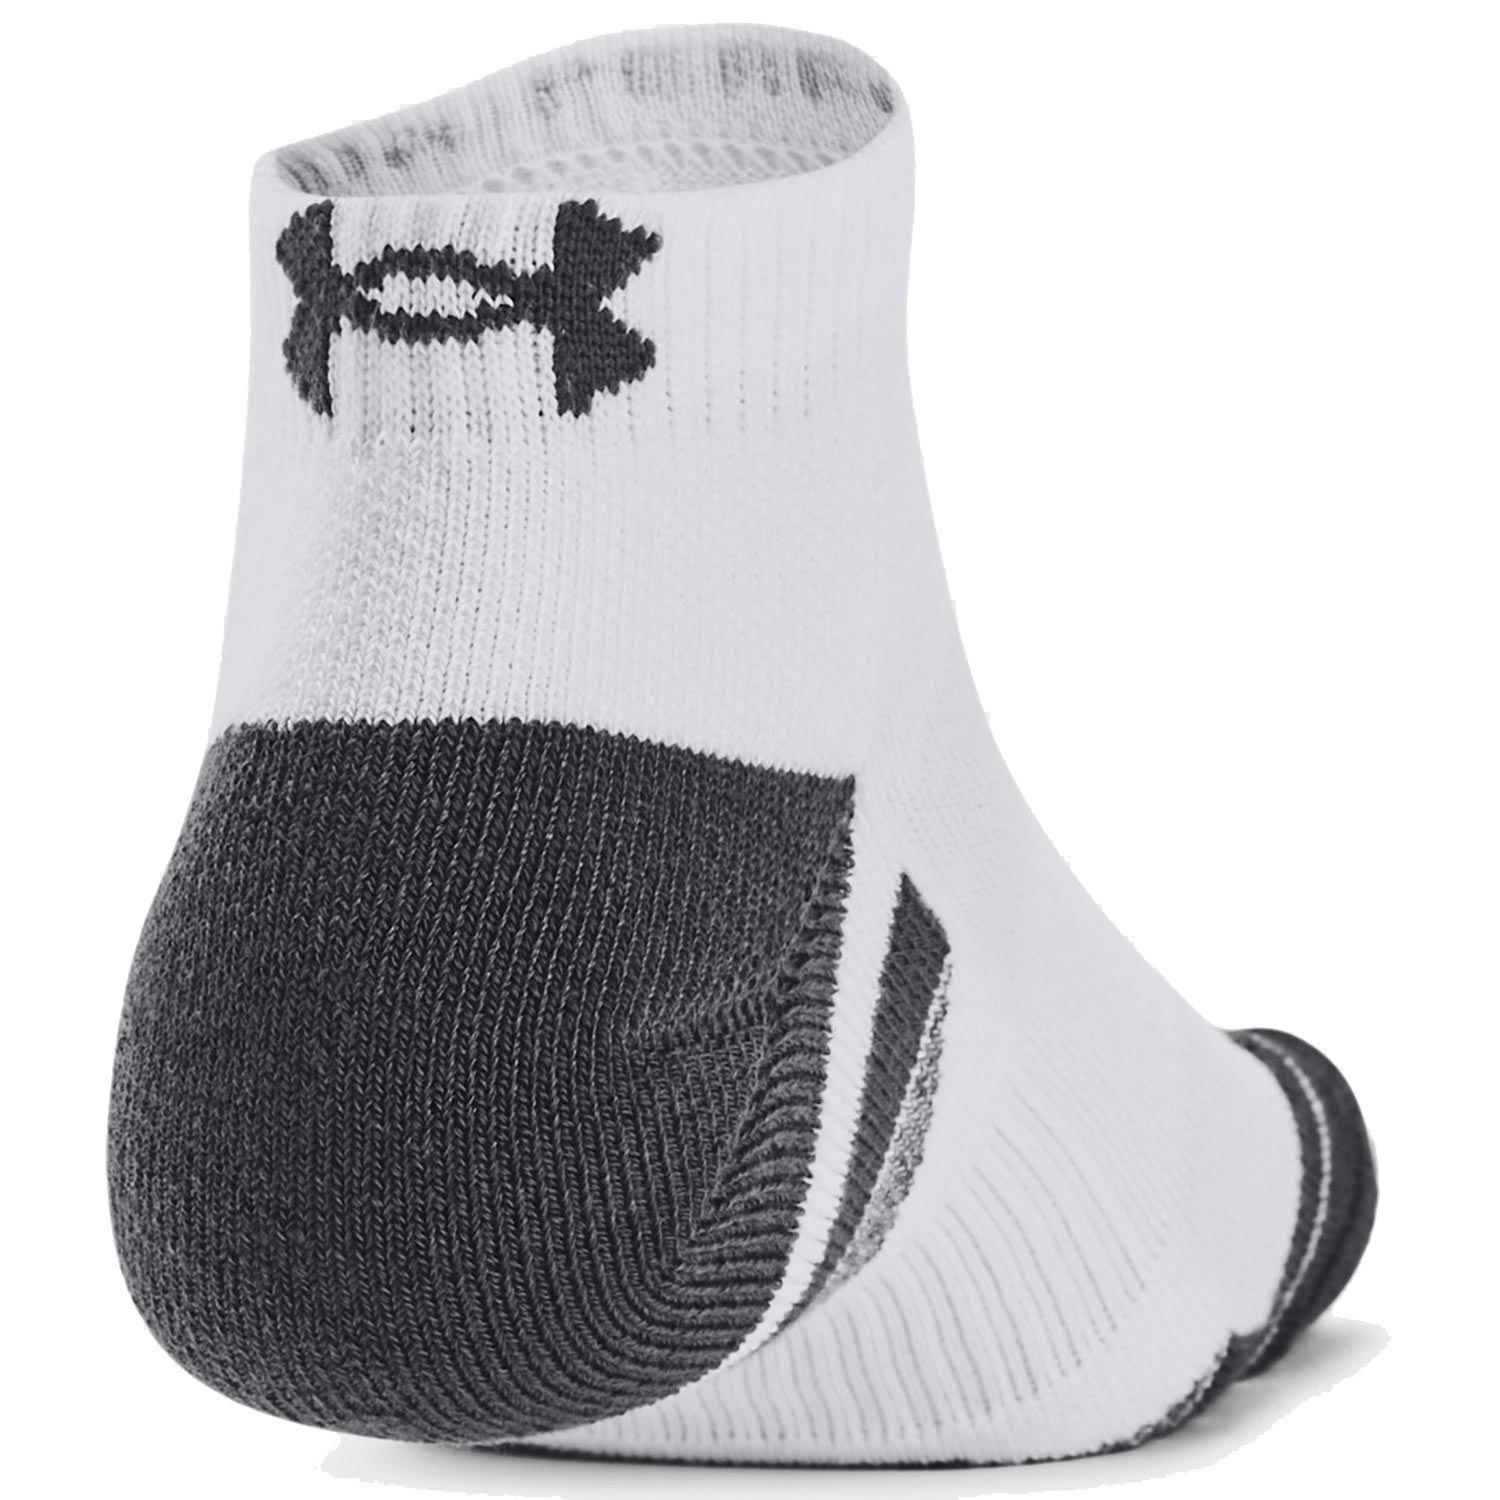 UNDER ARMOUR PERFORMANCE TECH 3 PACK LOW SOCKS